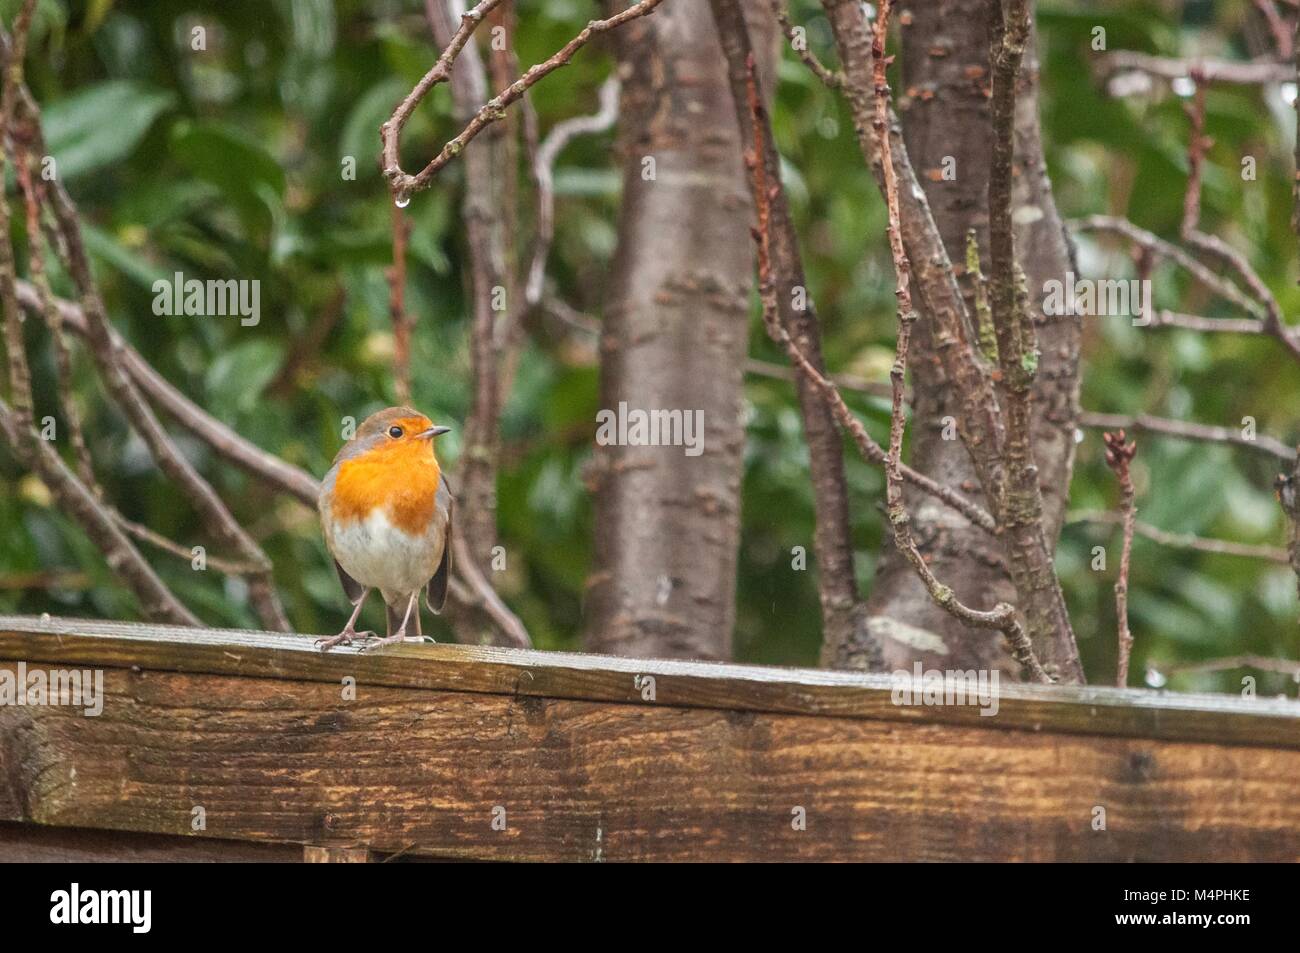 A small robin perched on a wooden fence in a British garden Stock Photo